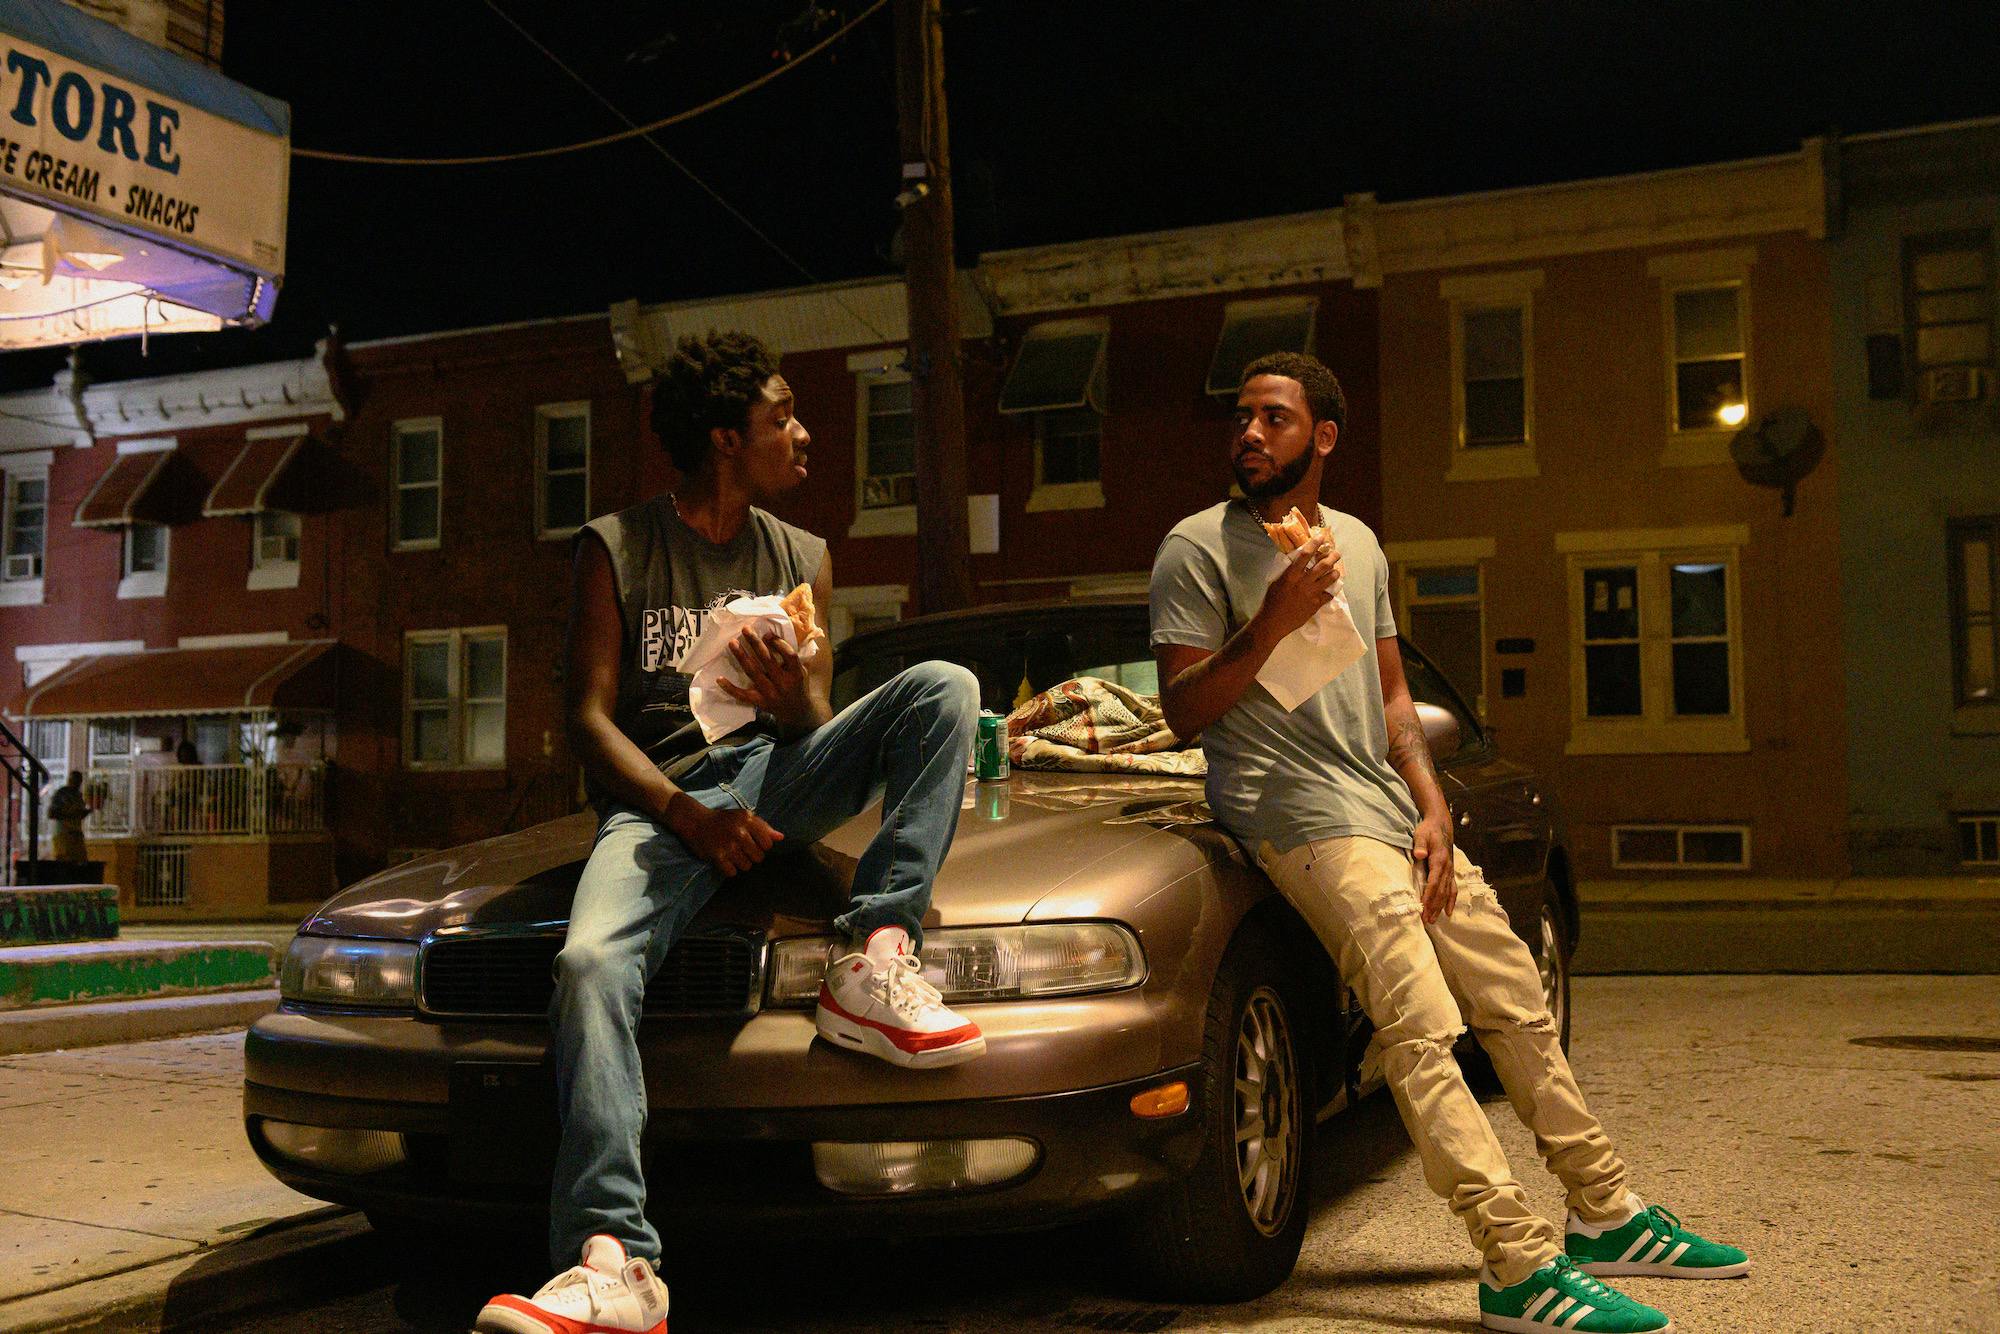 two teens sitting on the front of a car